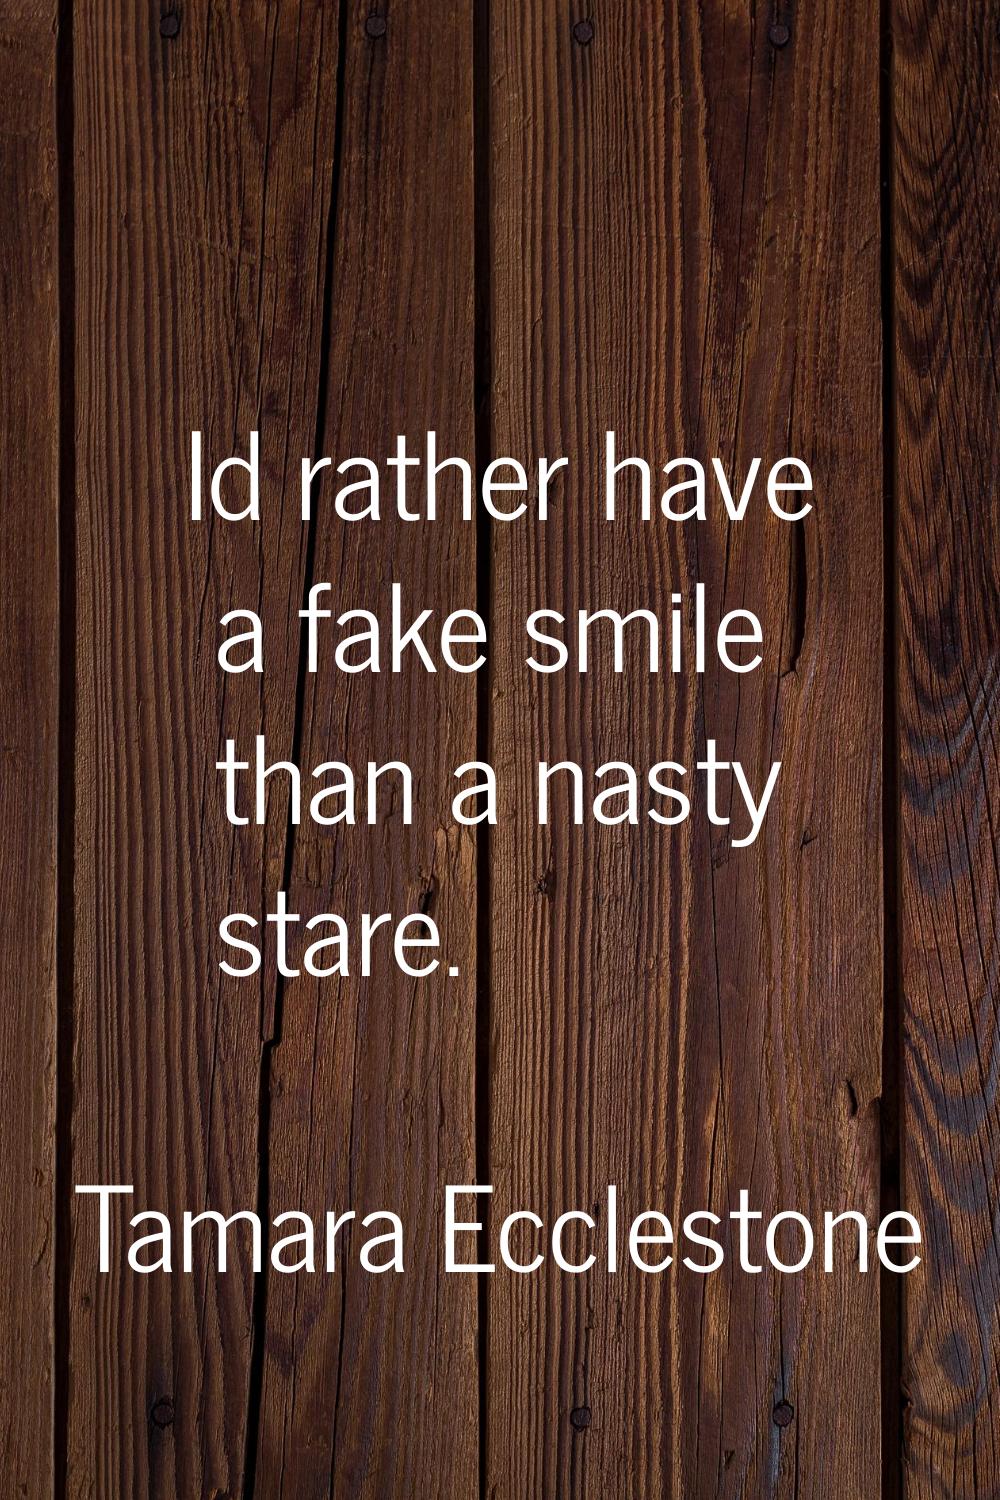 Id rather have a fake smile than a nasty stare.